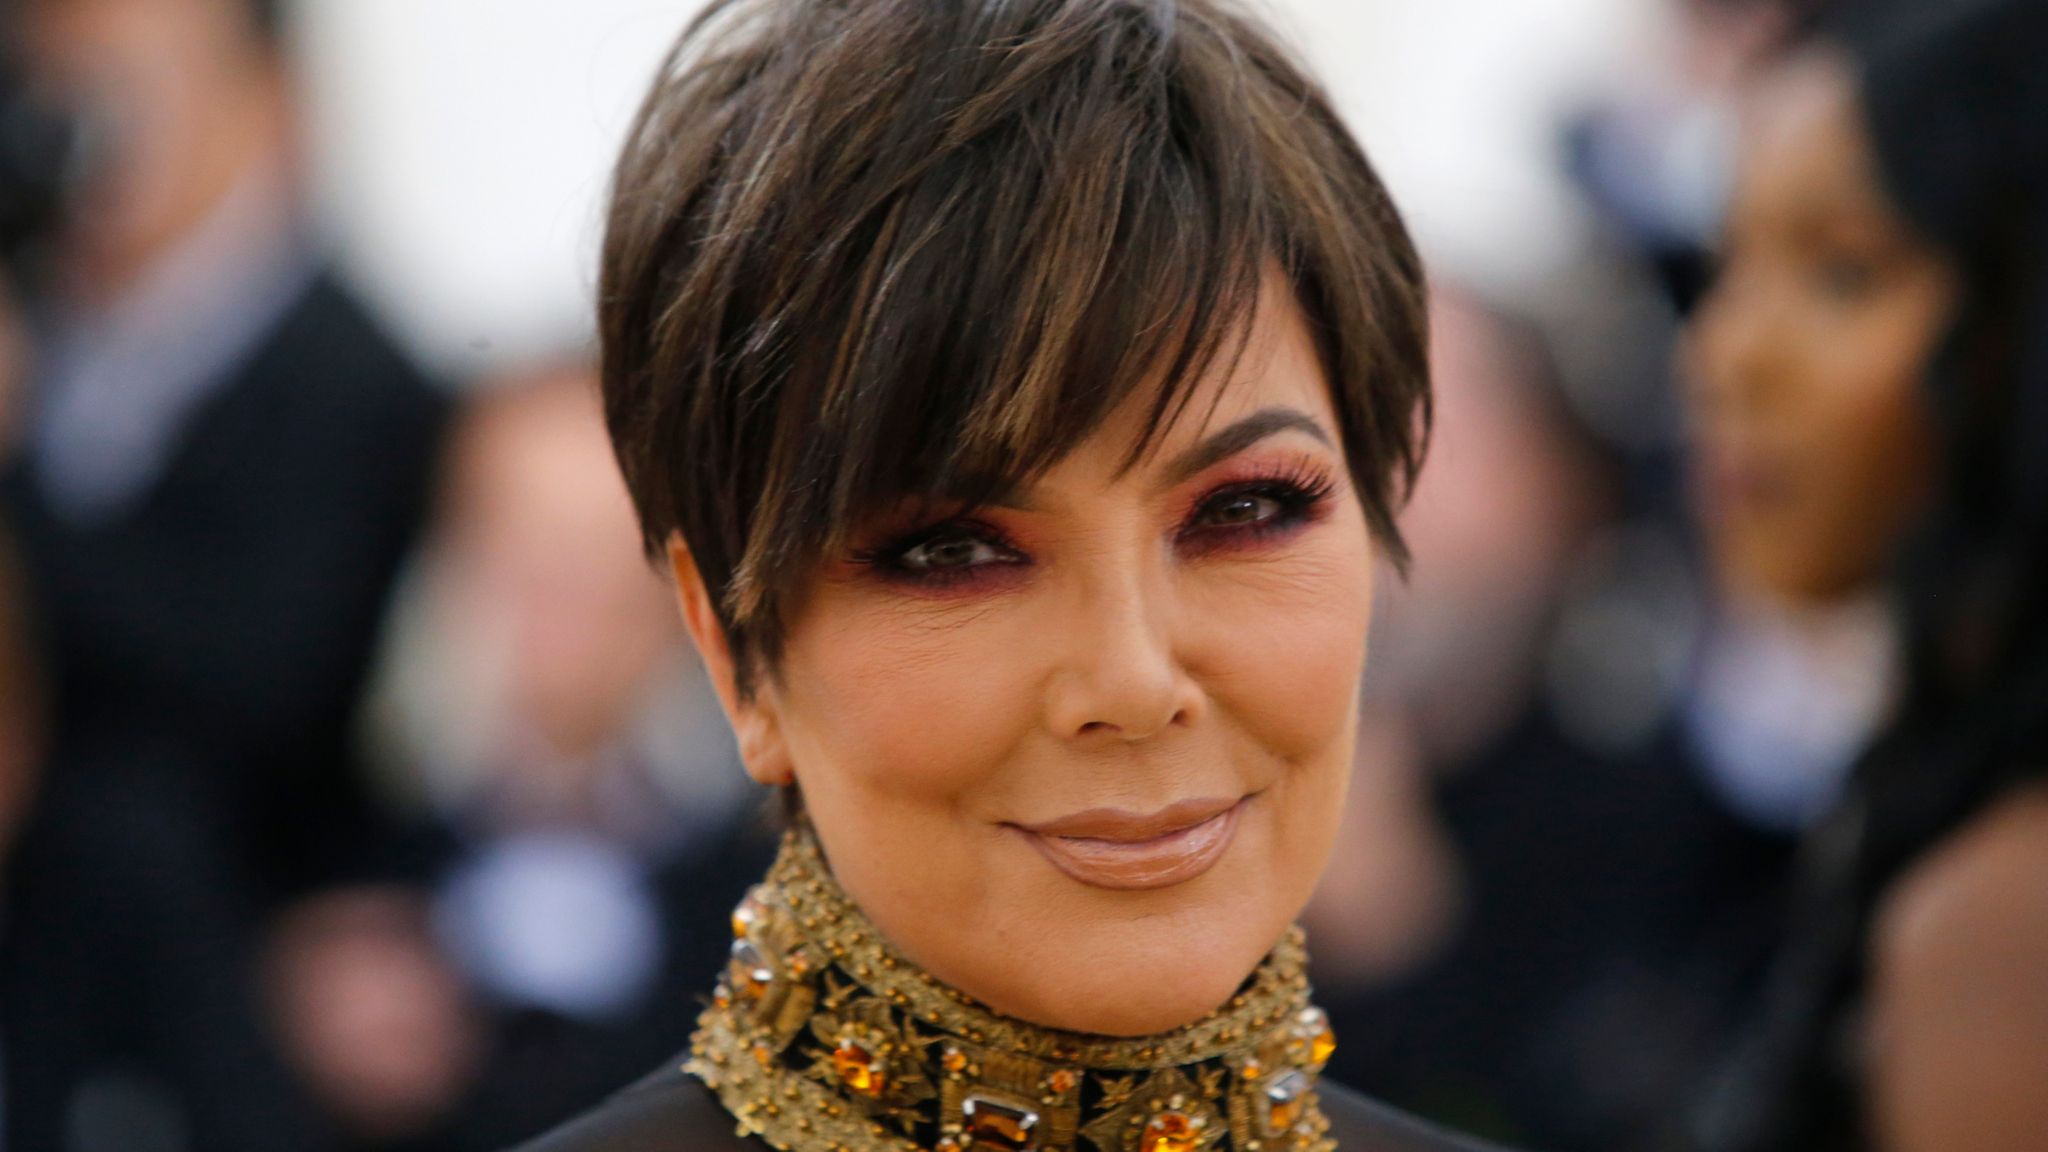 Kardashians star Kris Jenner accused of sexual harassment by former bodyguard. Ents & Arts News